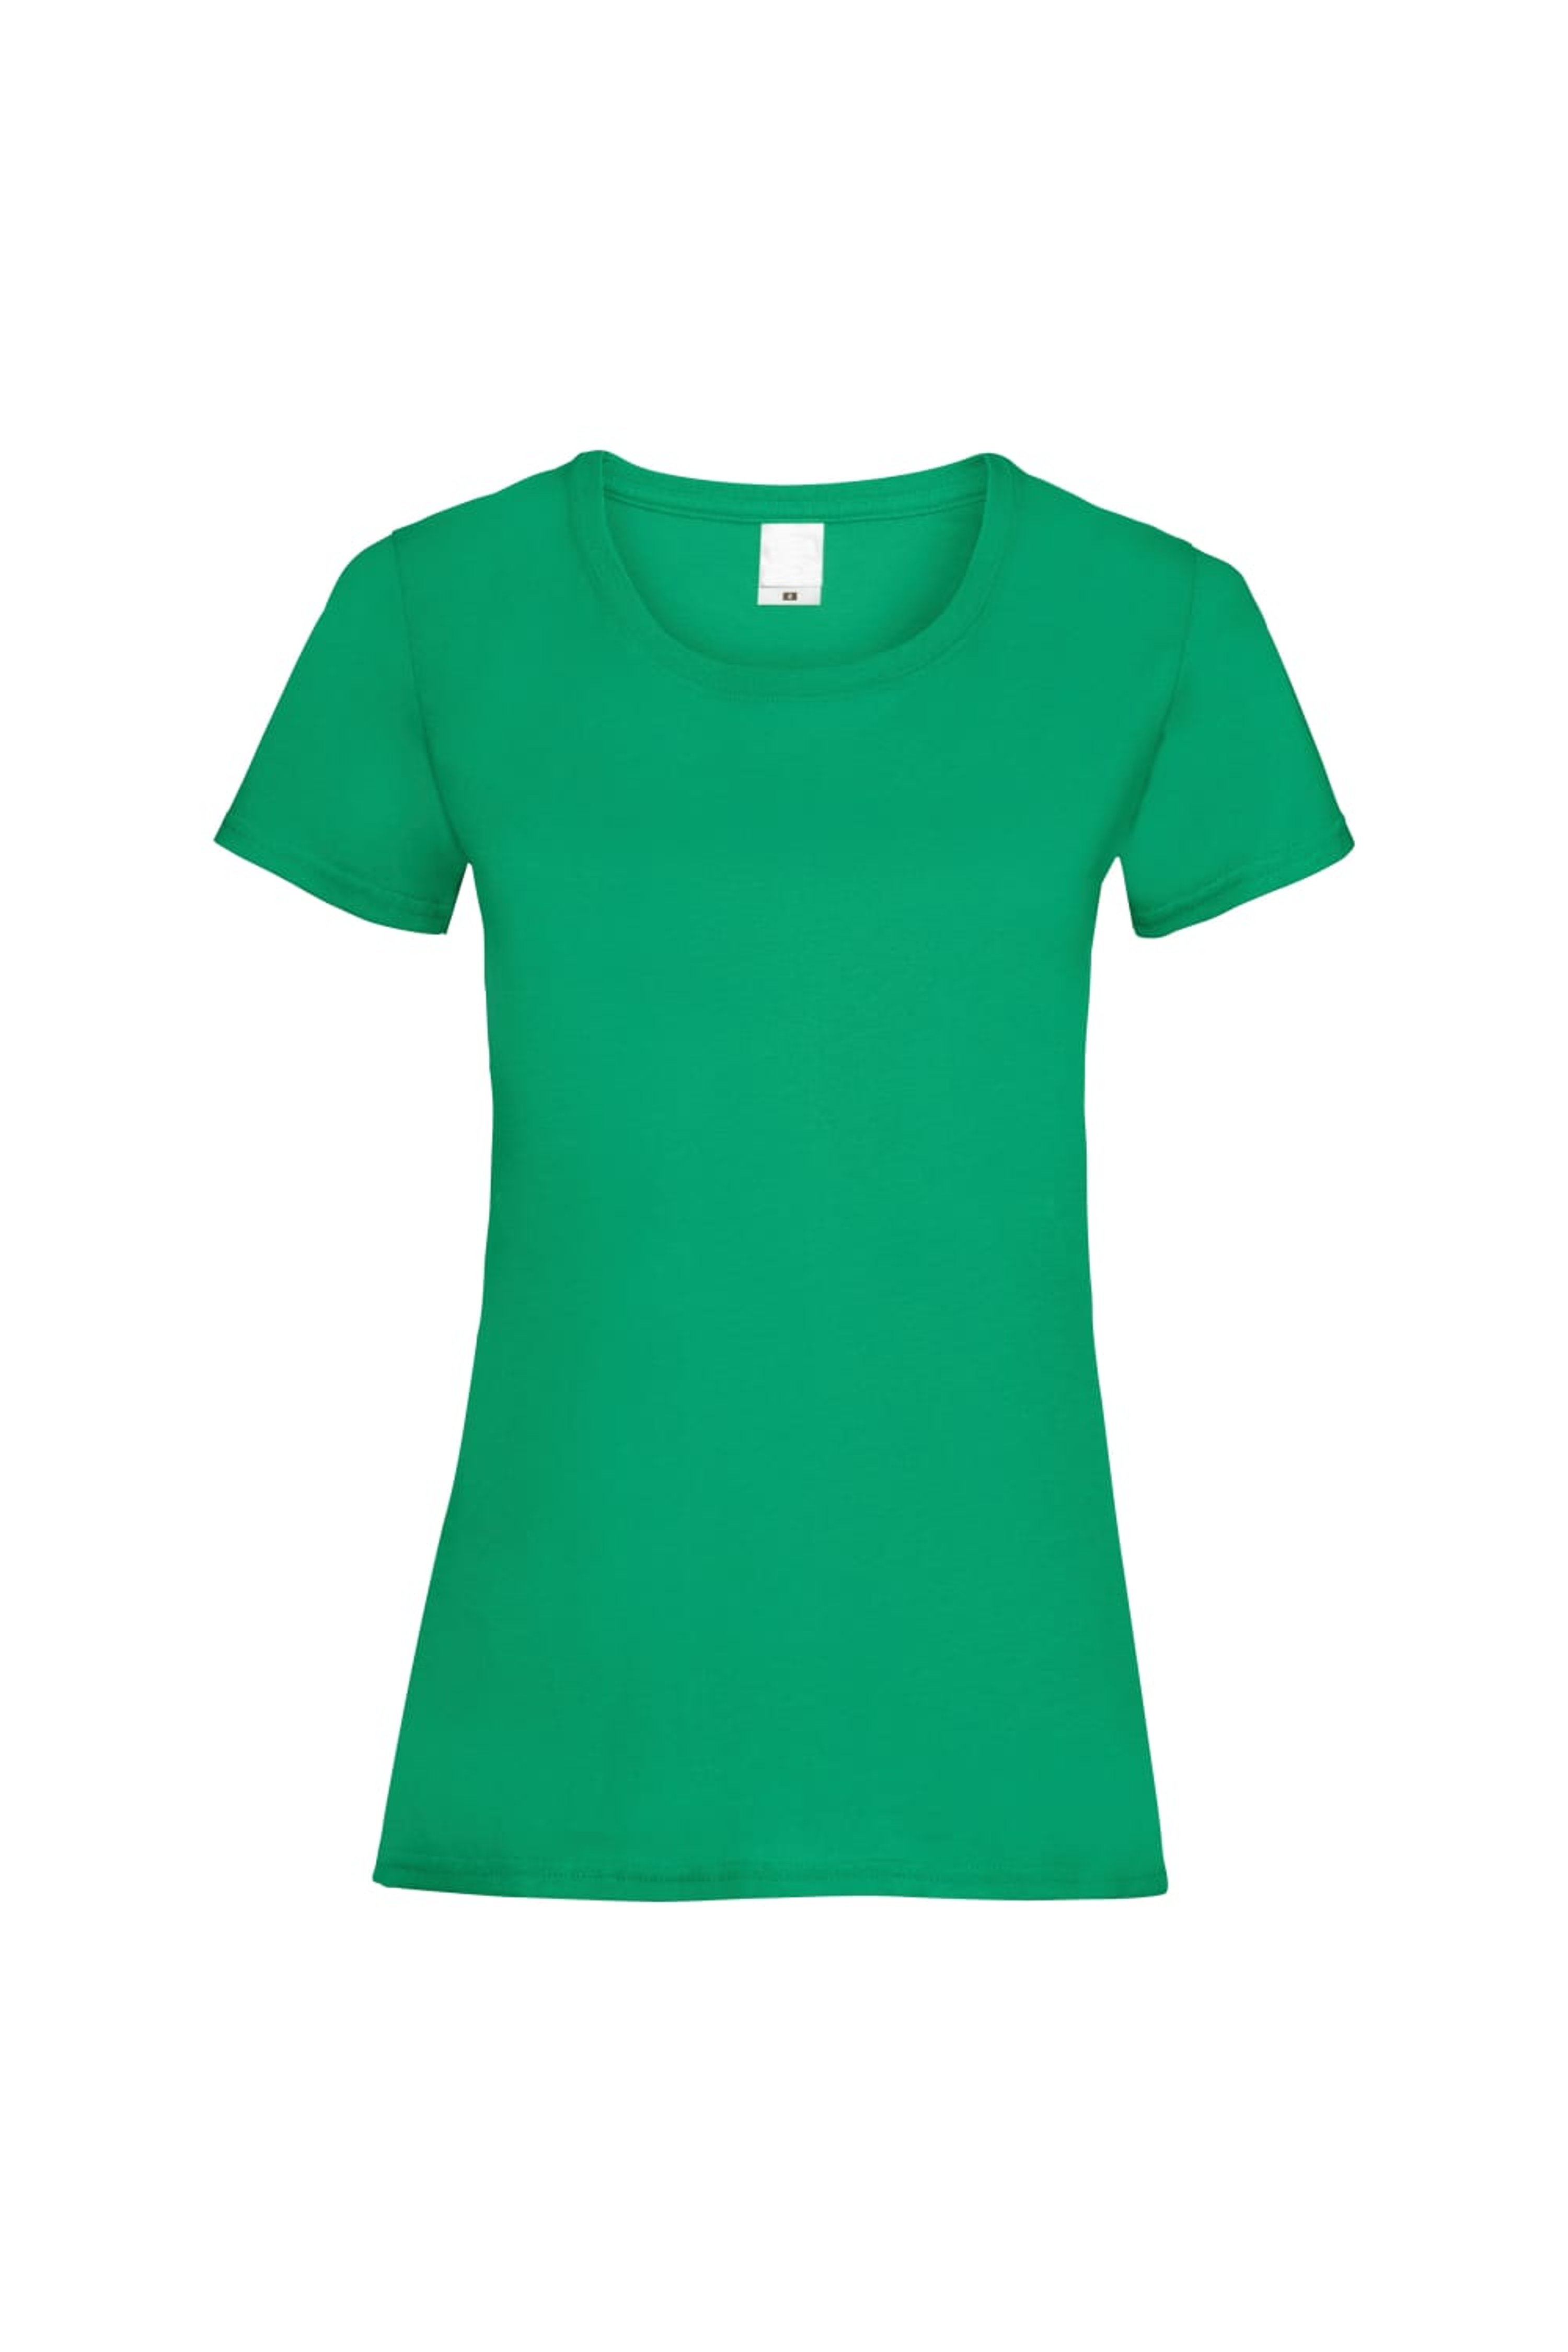 UNIVERSAL TEXTILES UNIVERSAL TEXTILES WOMENS/LADIES VALUE FITTED SHORT SLEEVE CASUAL T-SHIRT (GREEN)